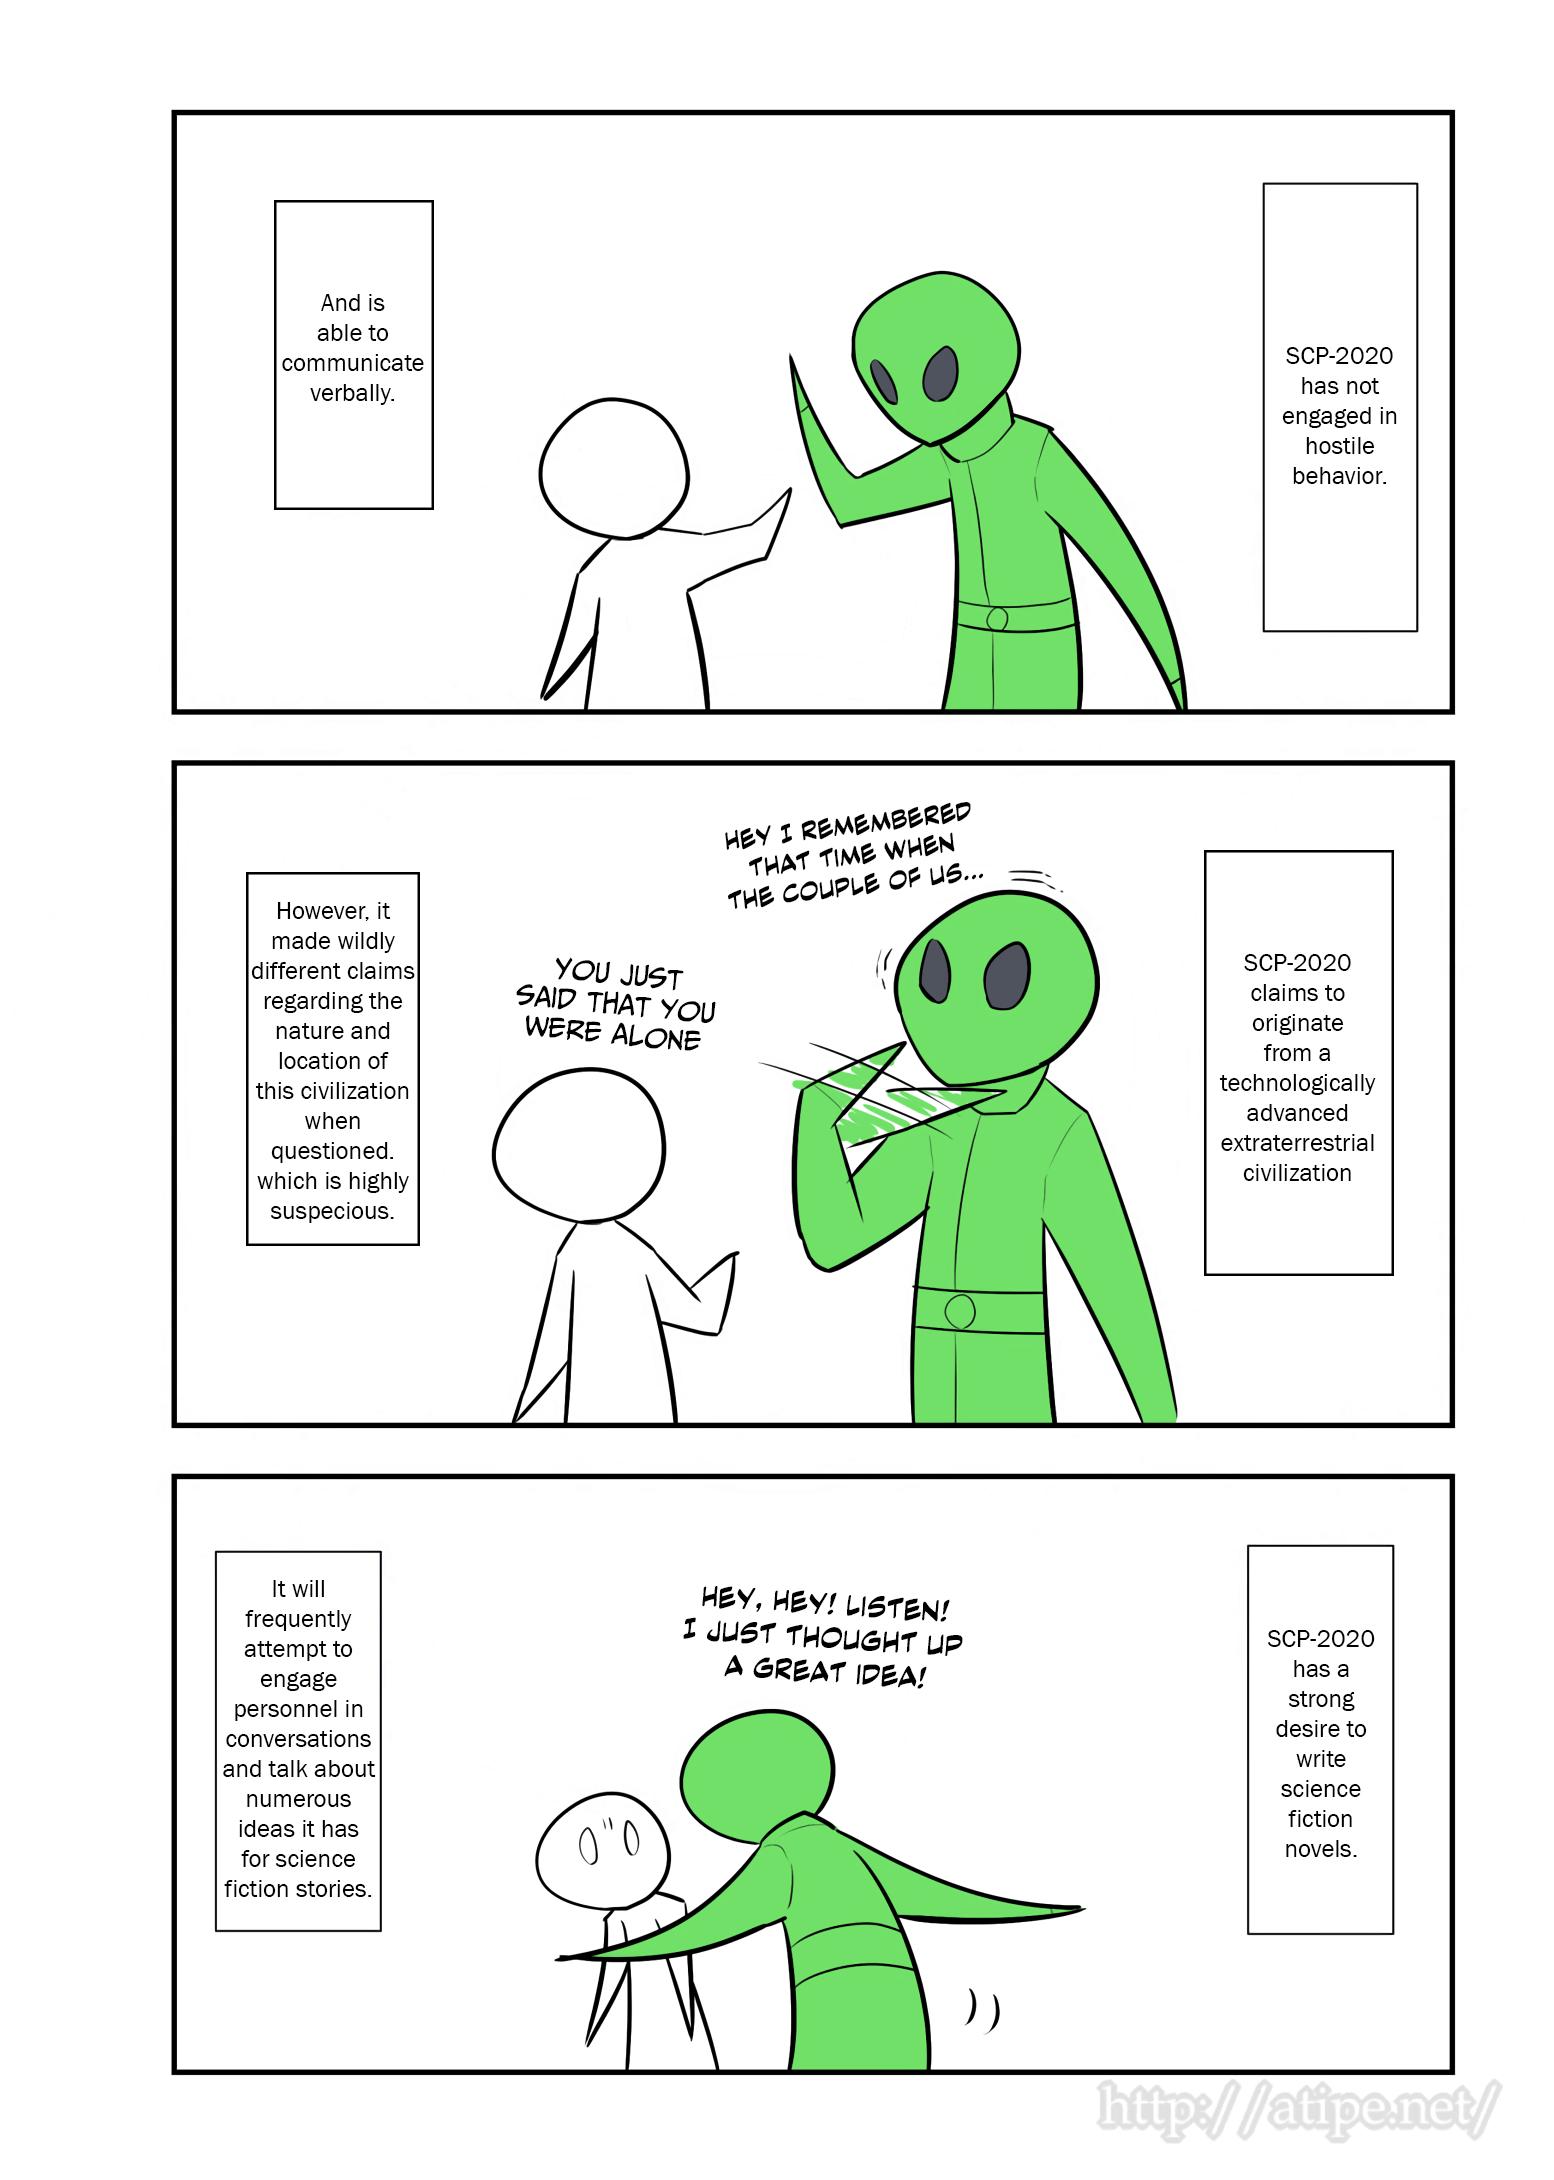 Tales From The Foundation  SCP Comics Vol 15: SCP-076 ABLE by Dr